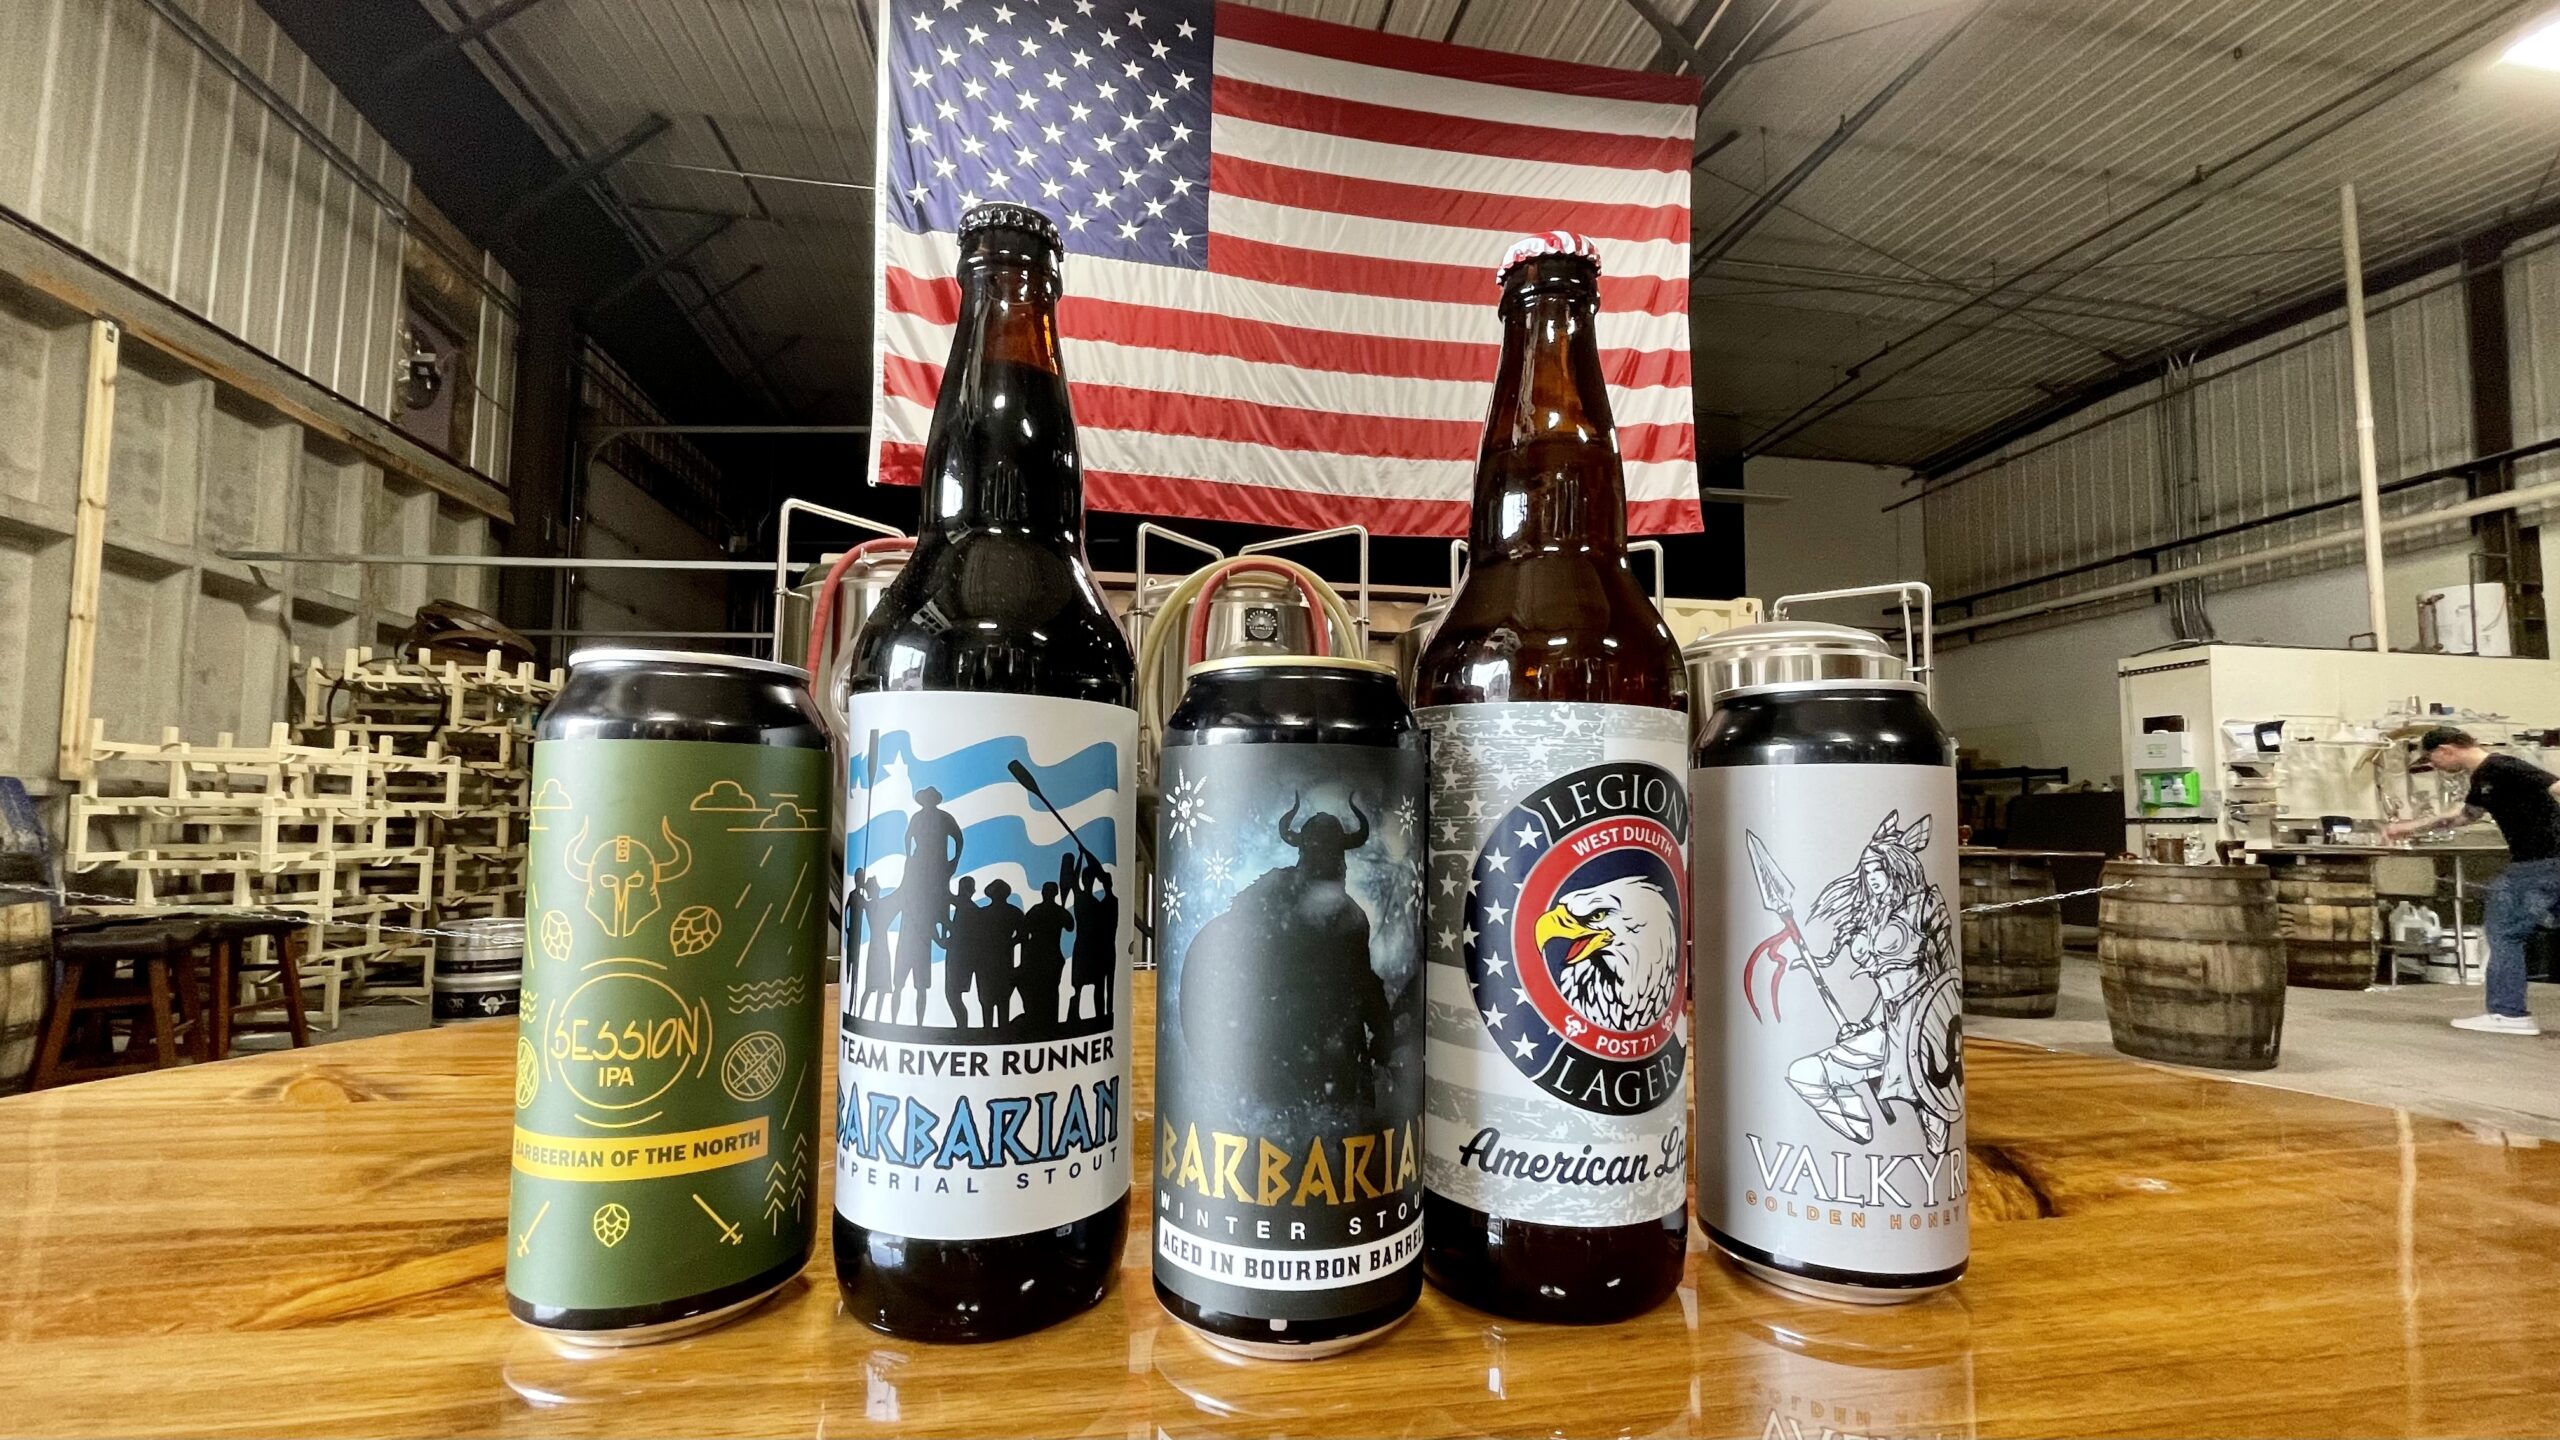 Cans and bottles of Warrior Brewing's beer